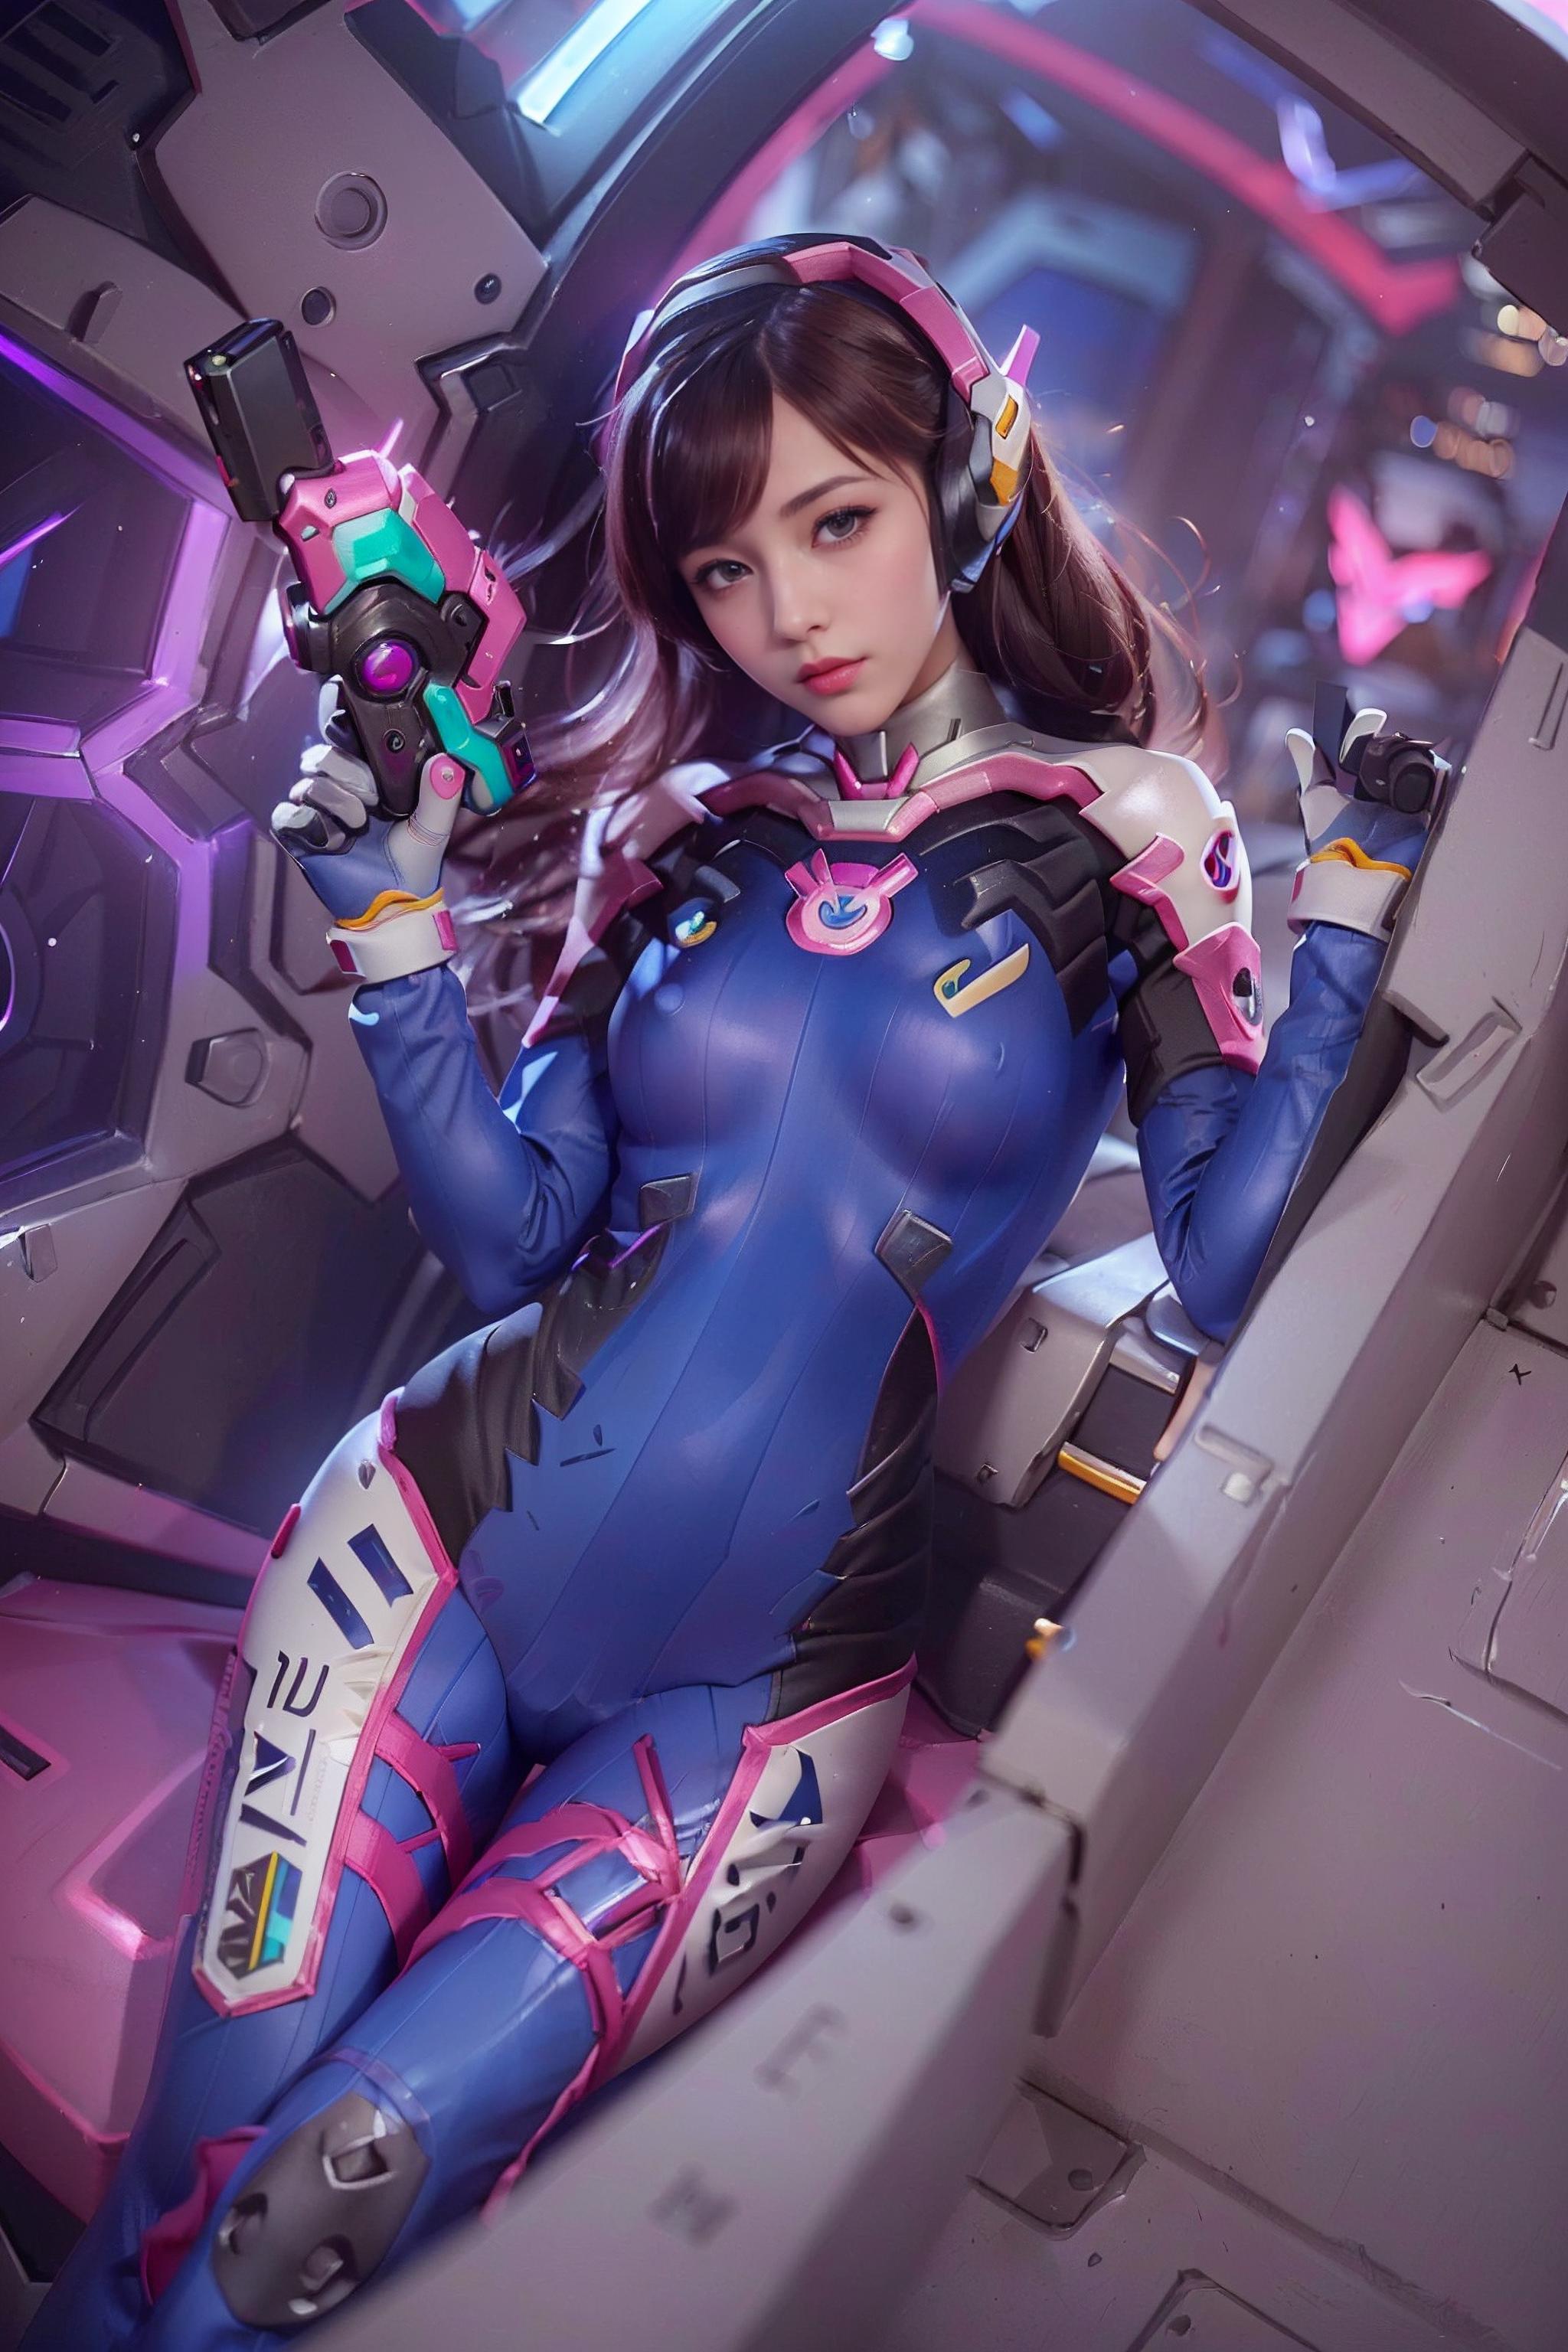 Tau's D.Va Cosplay image by Tauron